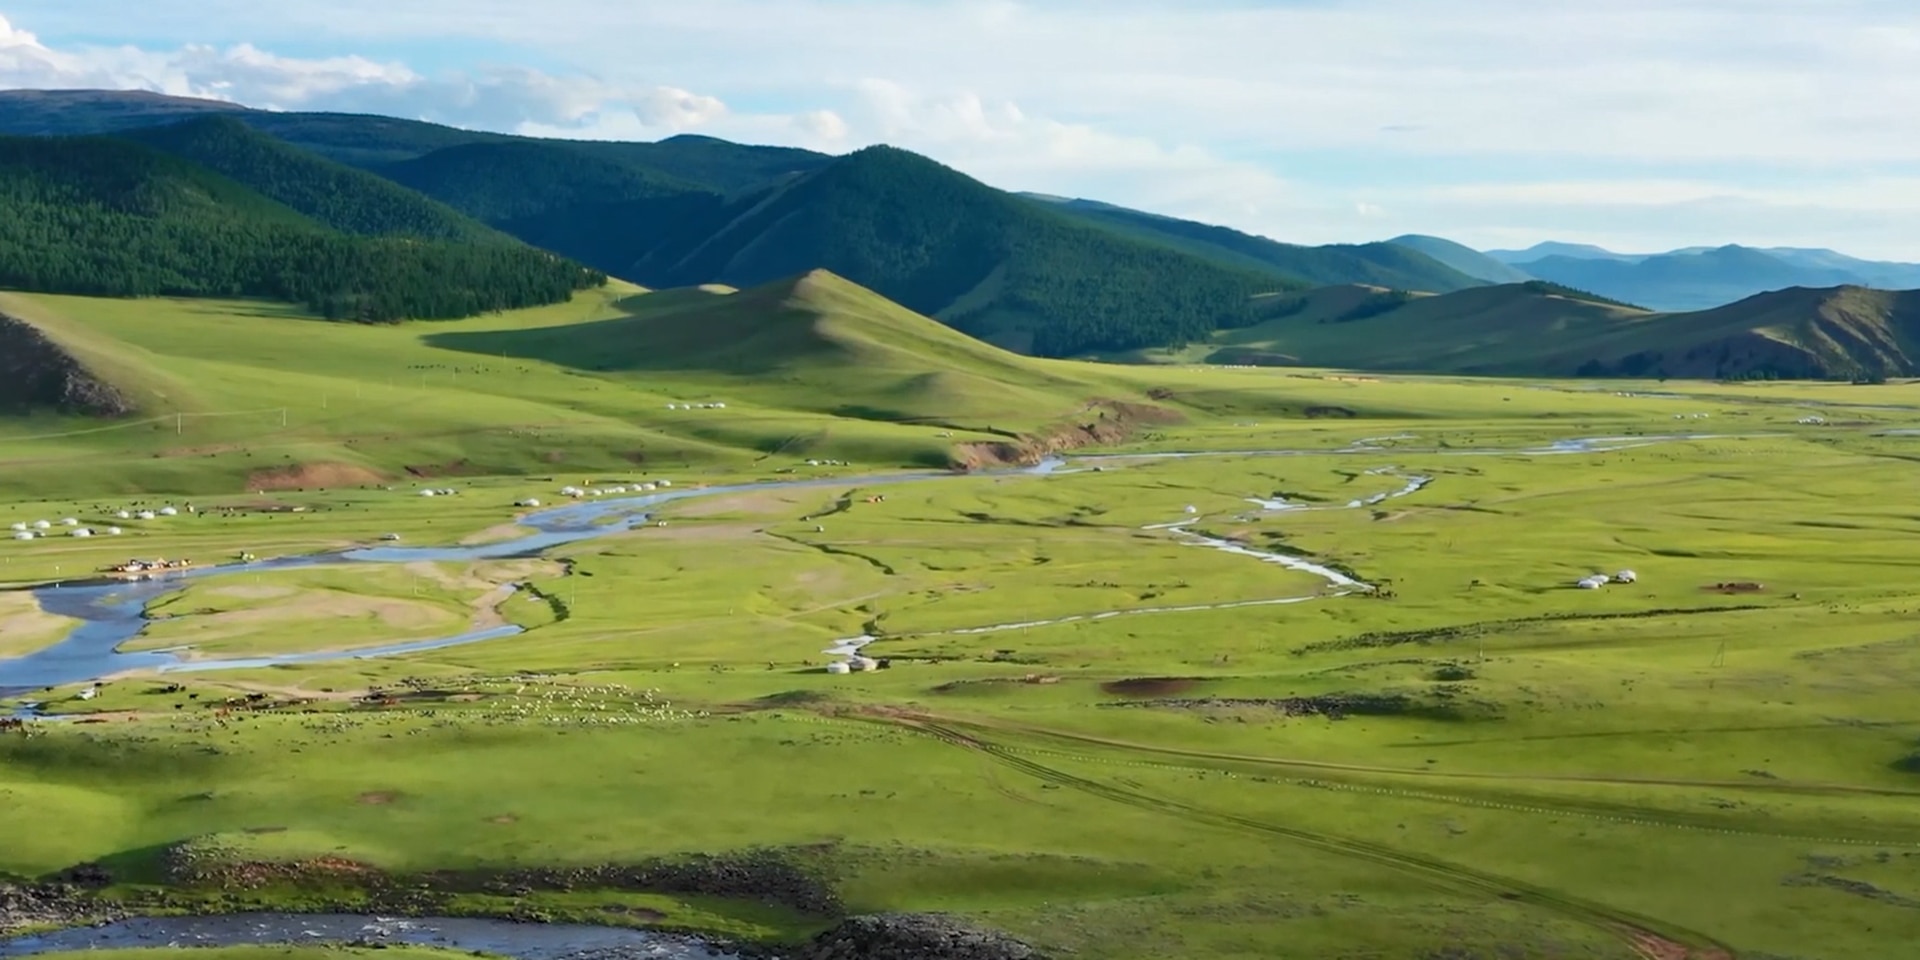 View of pastures and mountains in Mongolia.